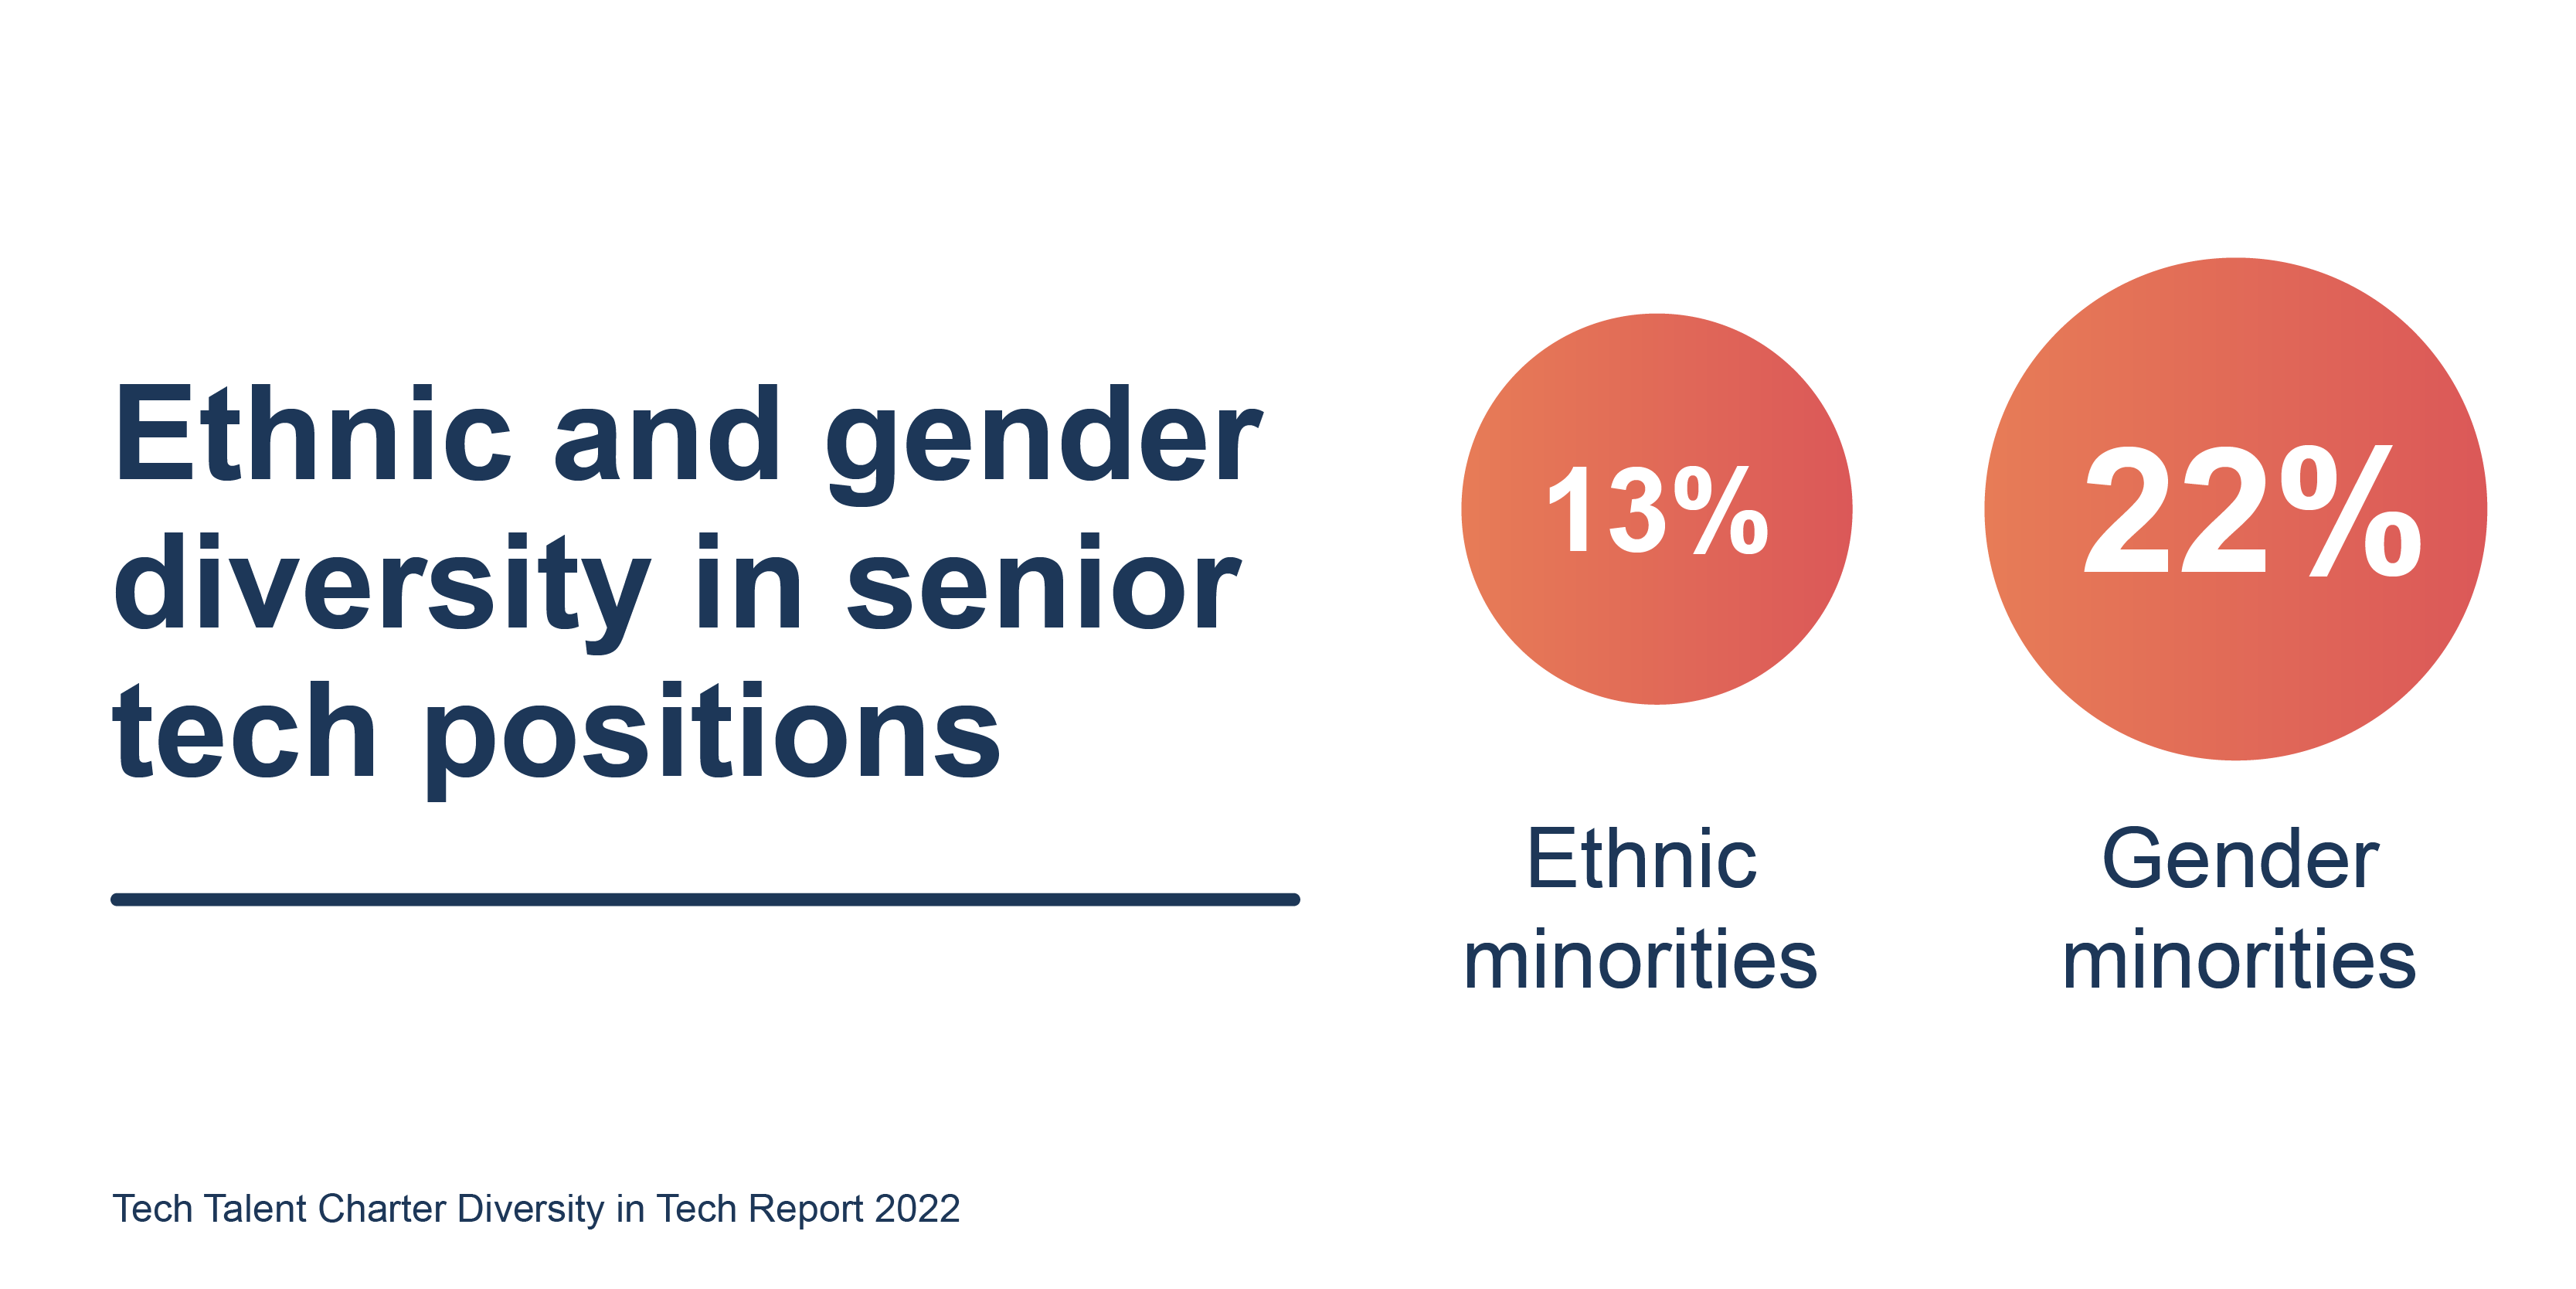 Ethnic diversity in senior tech positions is 13%, where gender diversity is 22%.